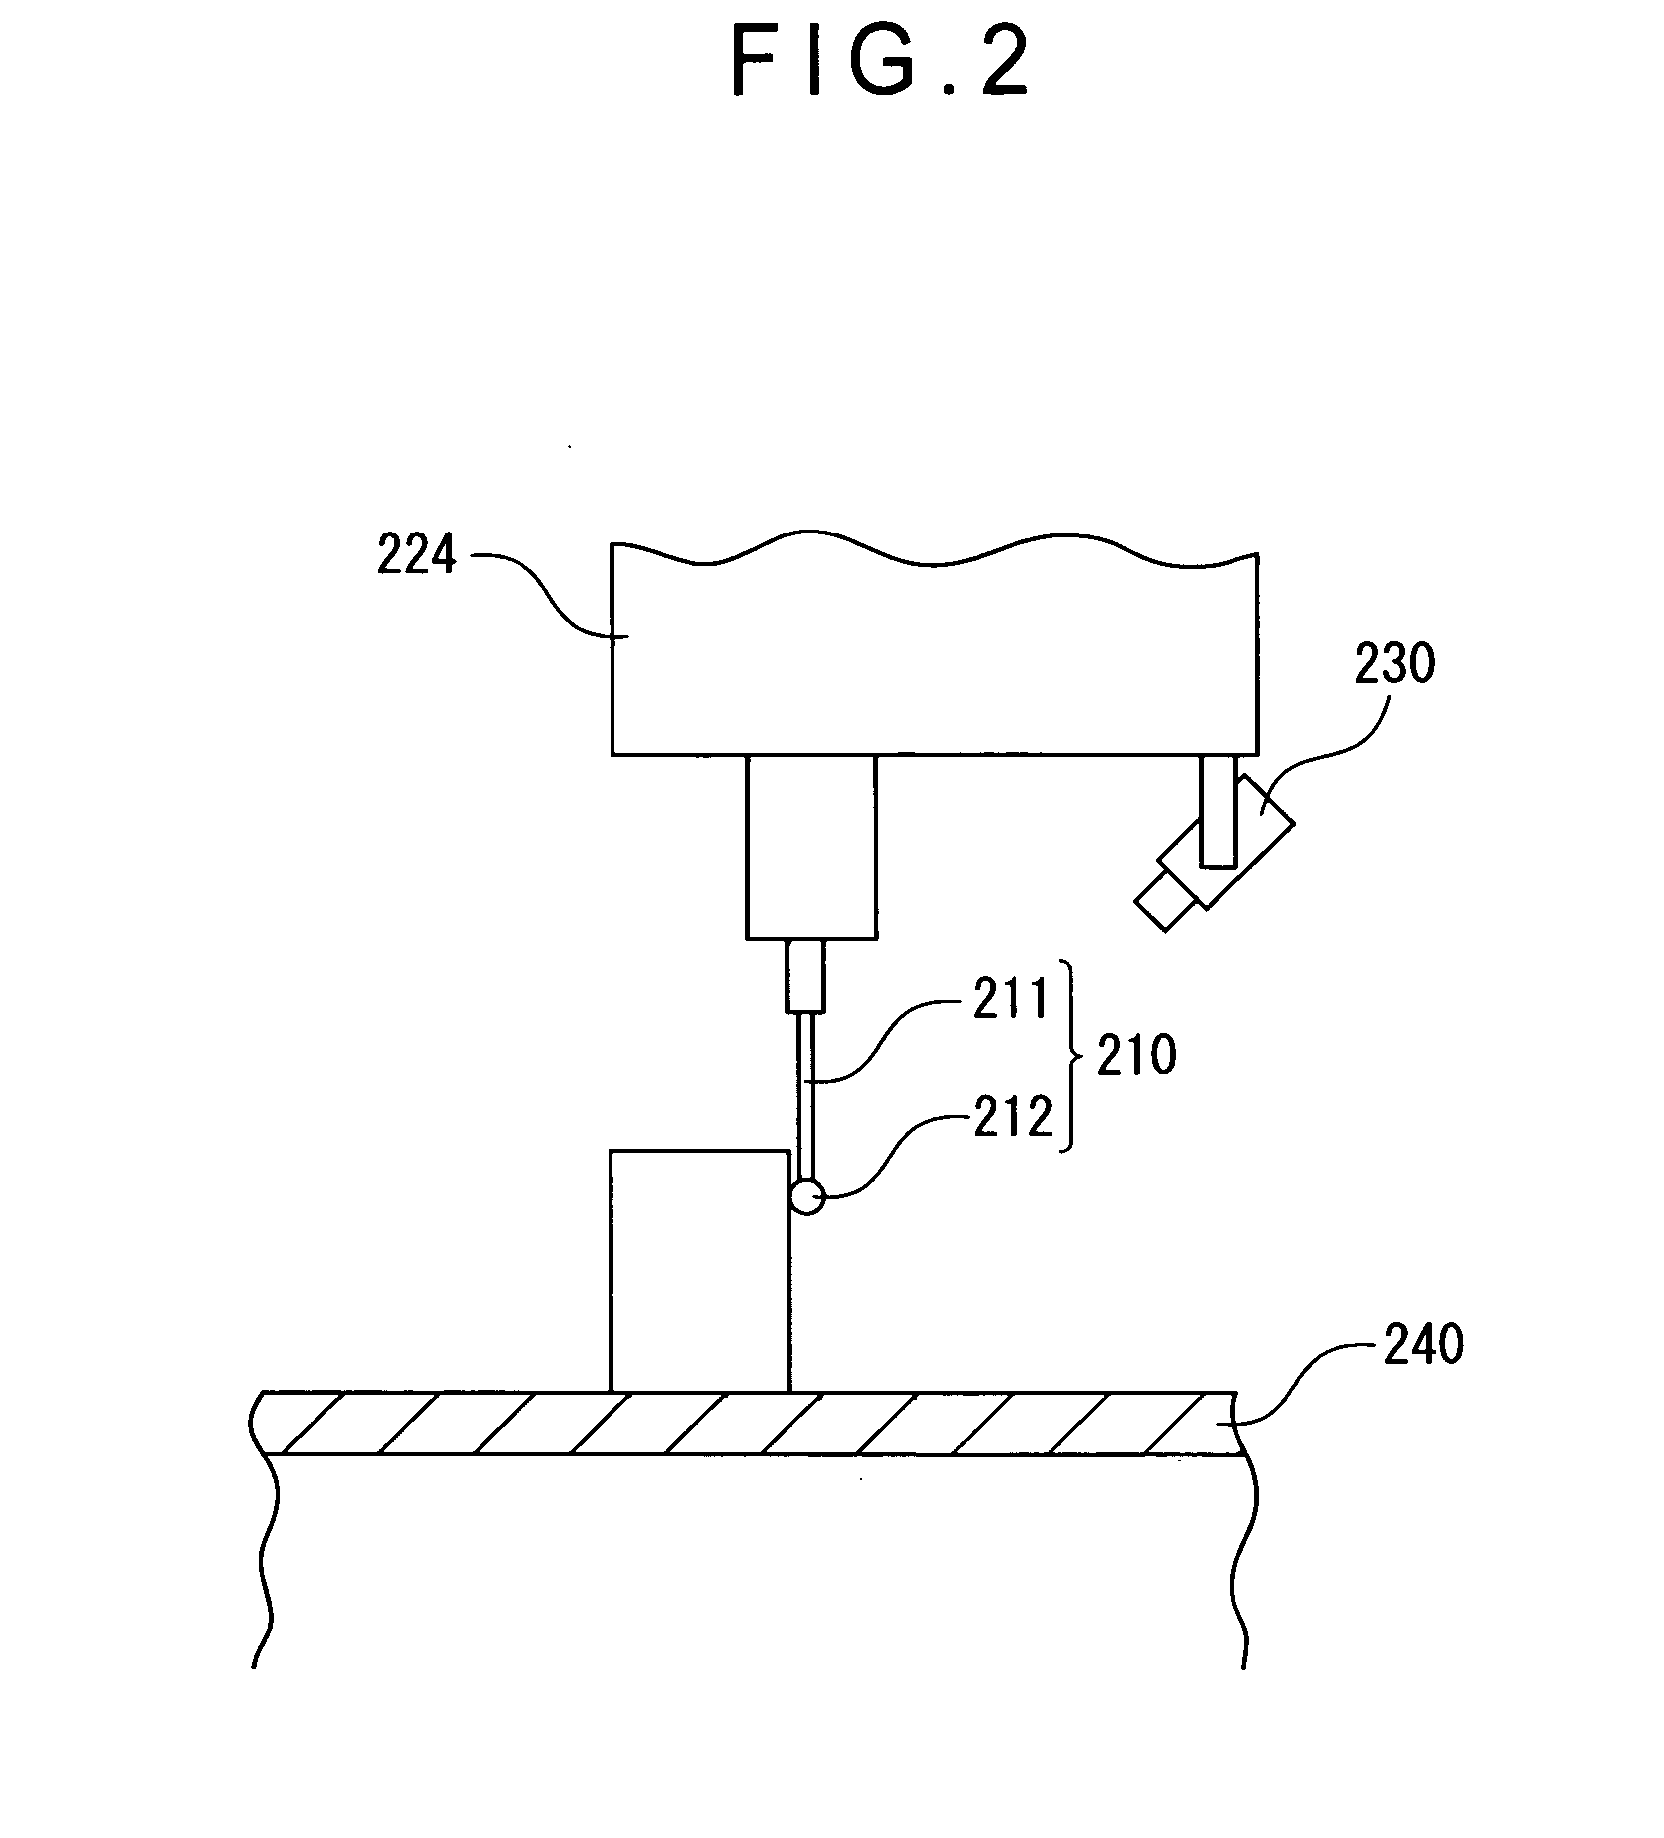 Probe observing device and surface texture measuring device